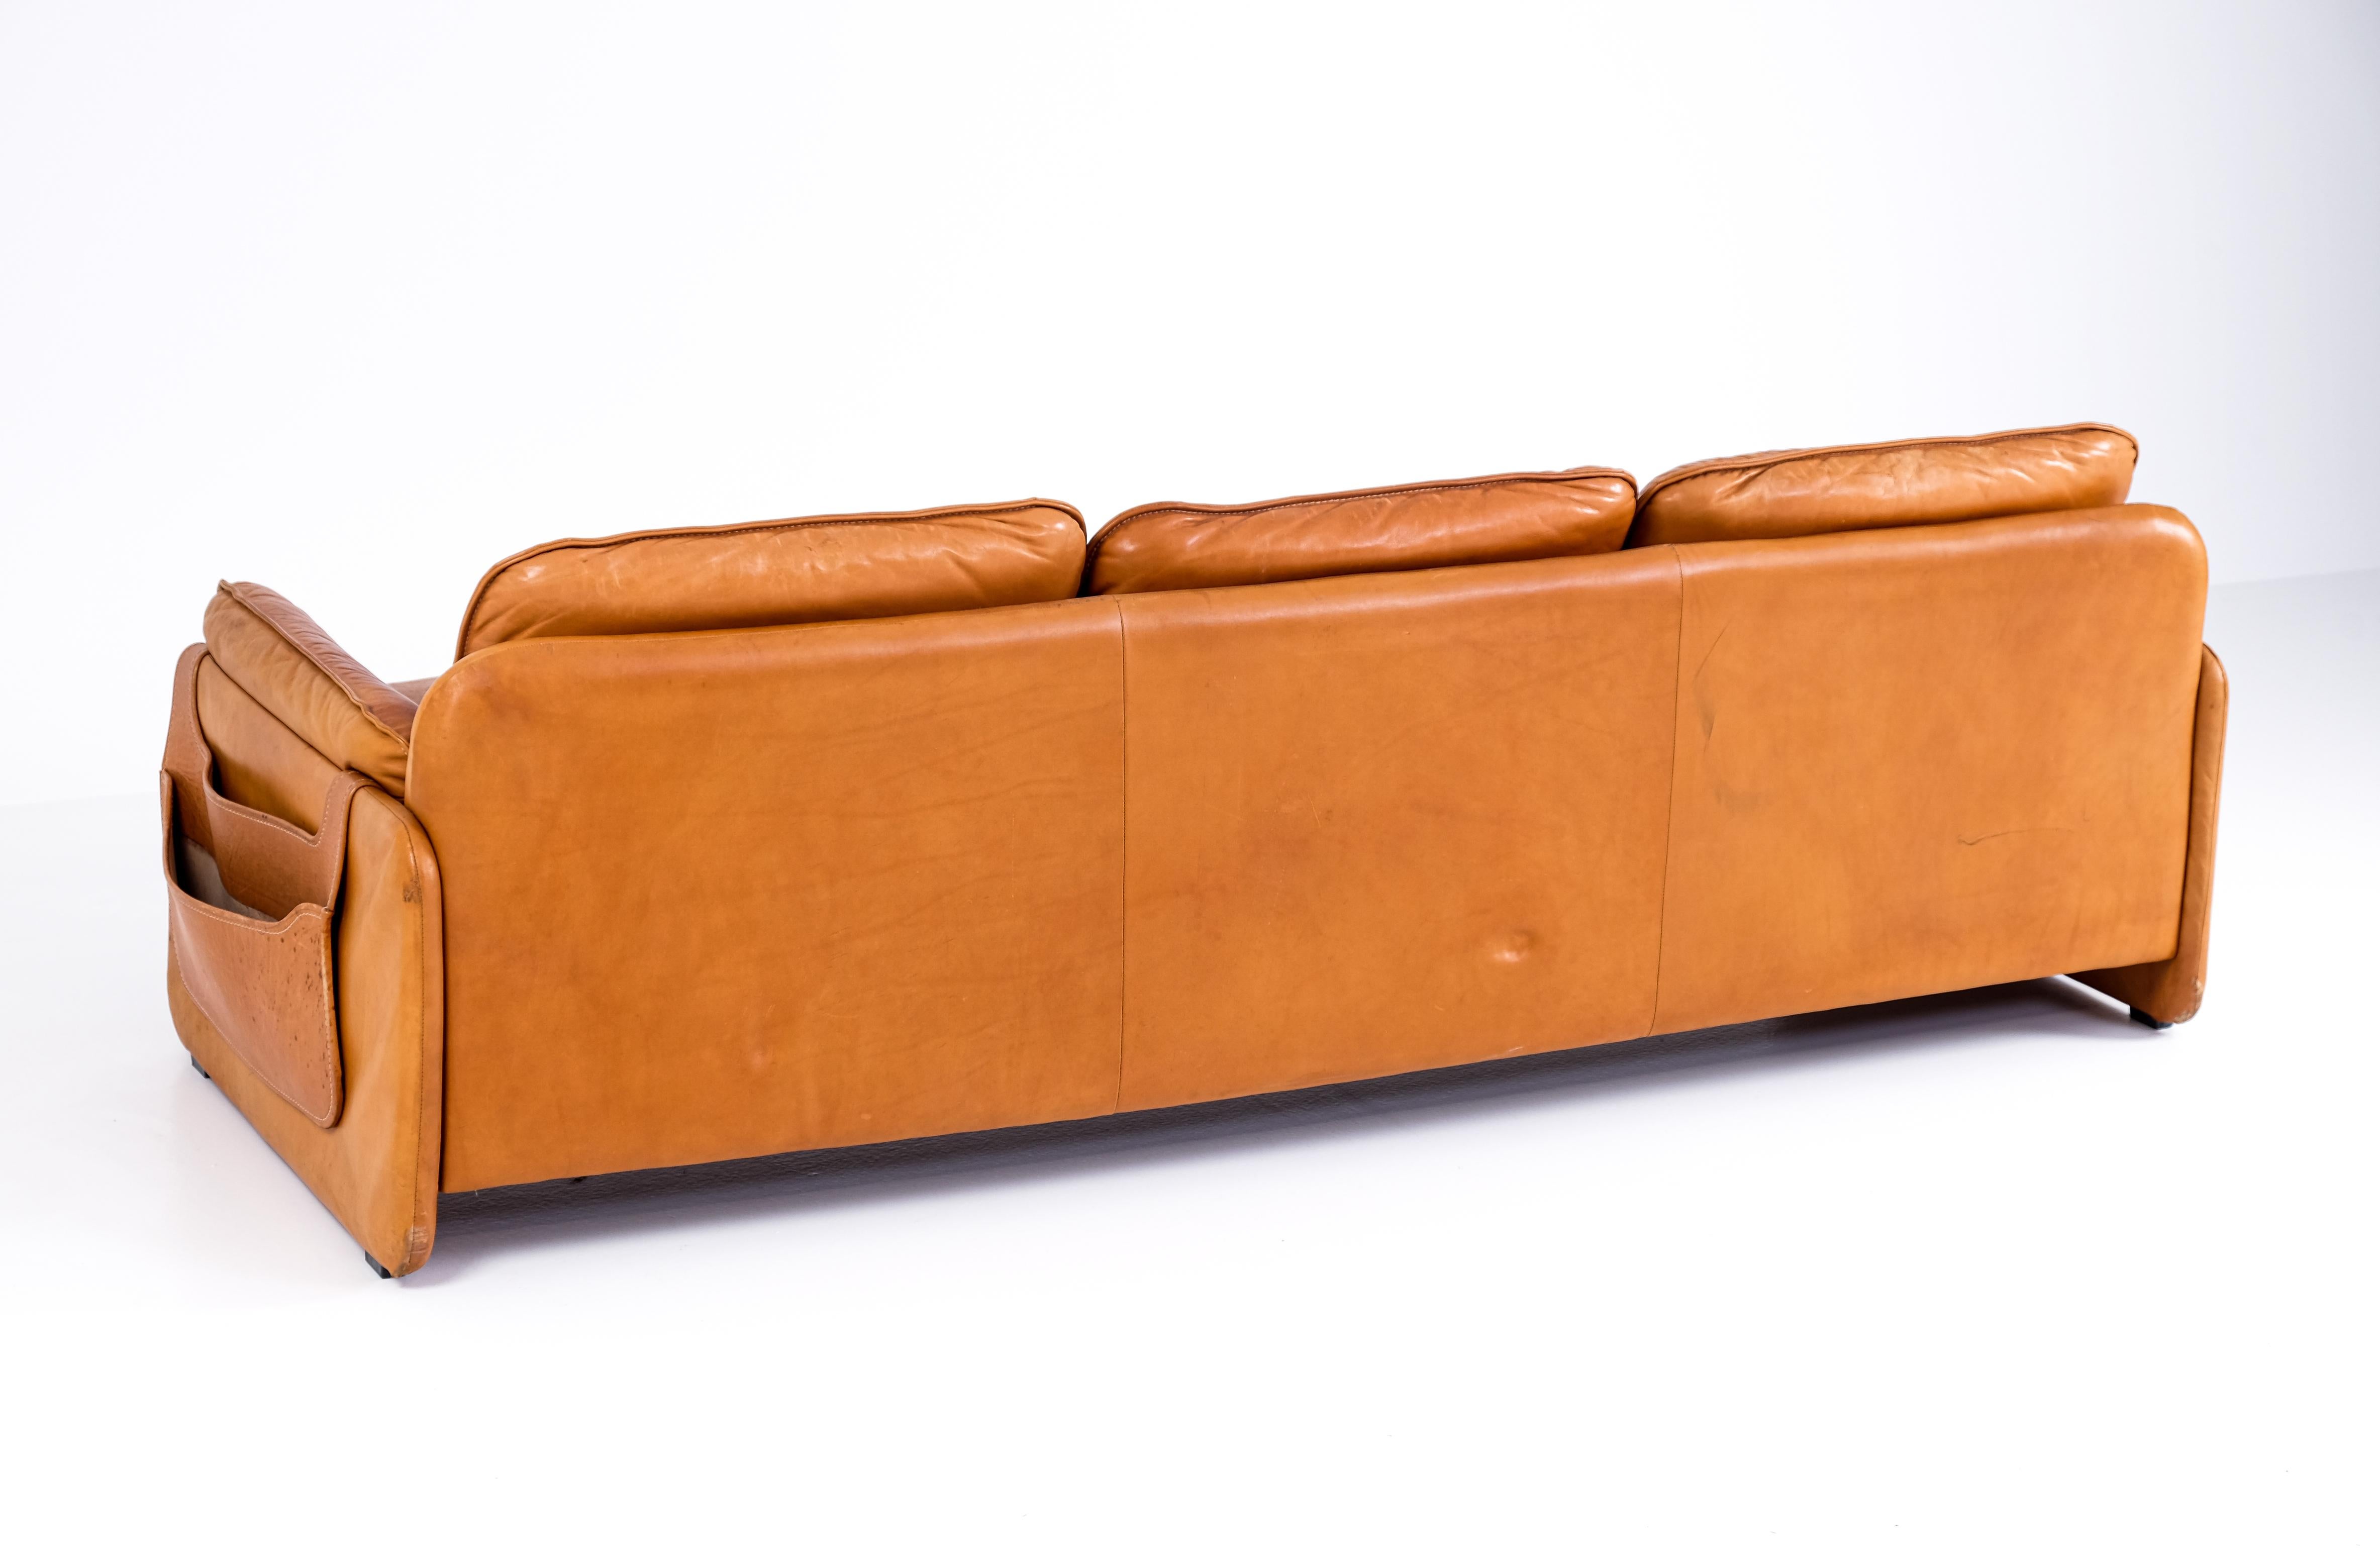 Leather Sofa DS-61 by De Sede, Switzerland, 1970s For Sale